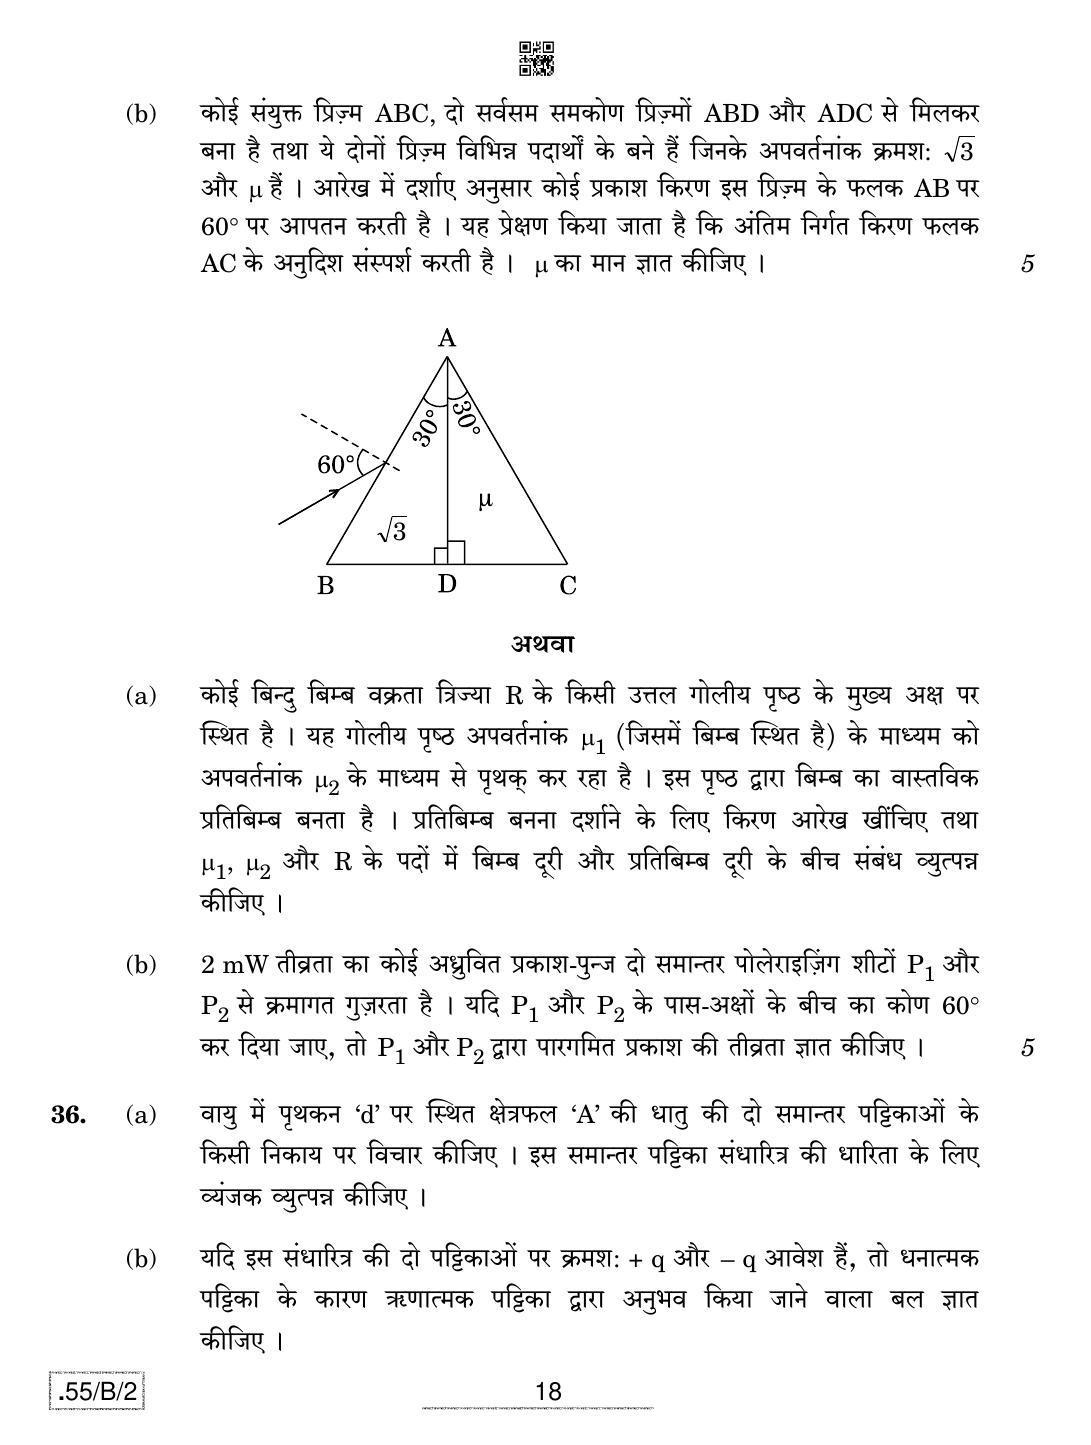 CBSE Class 12 55-C-2 - Physics 2020 Compartment Question Paper - Page 18